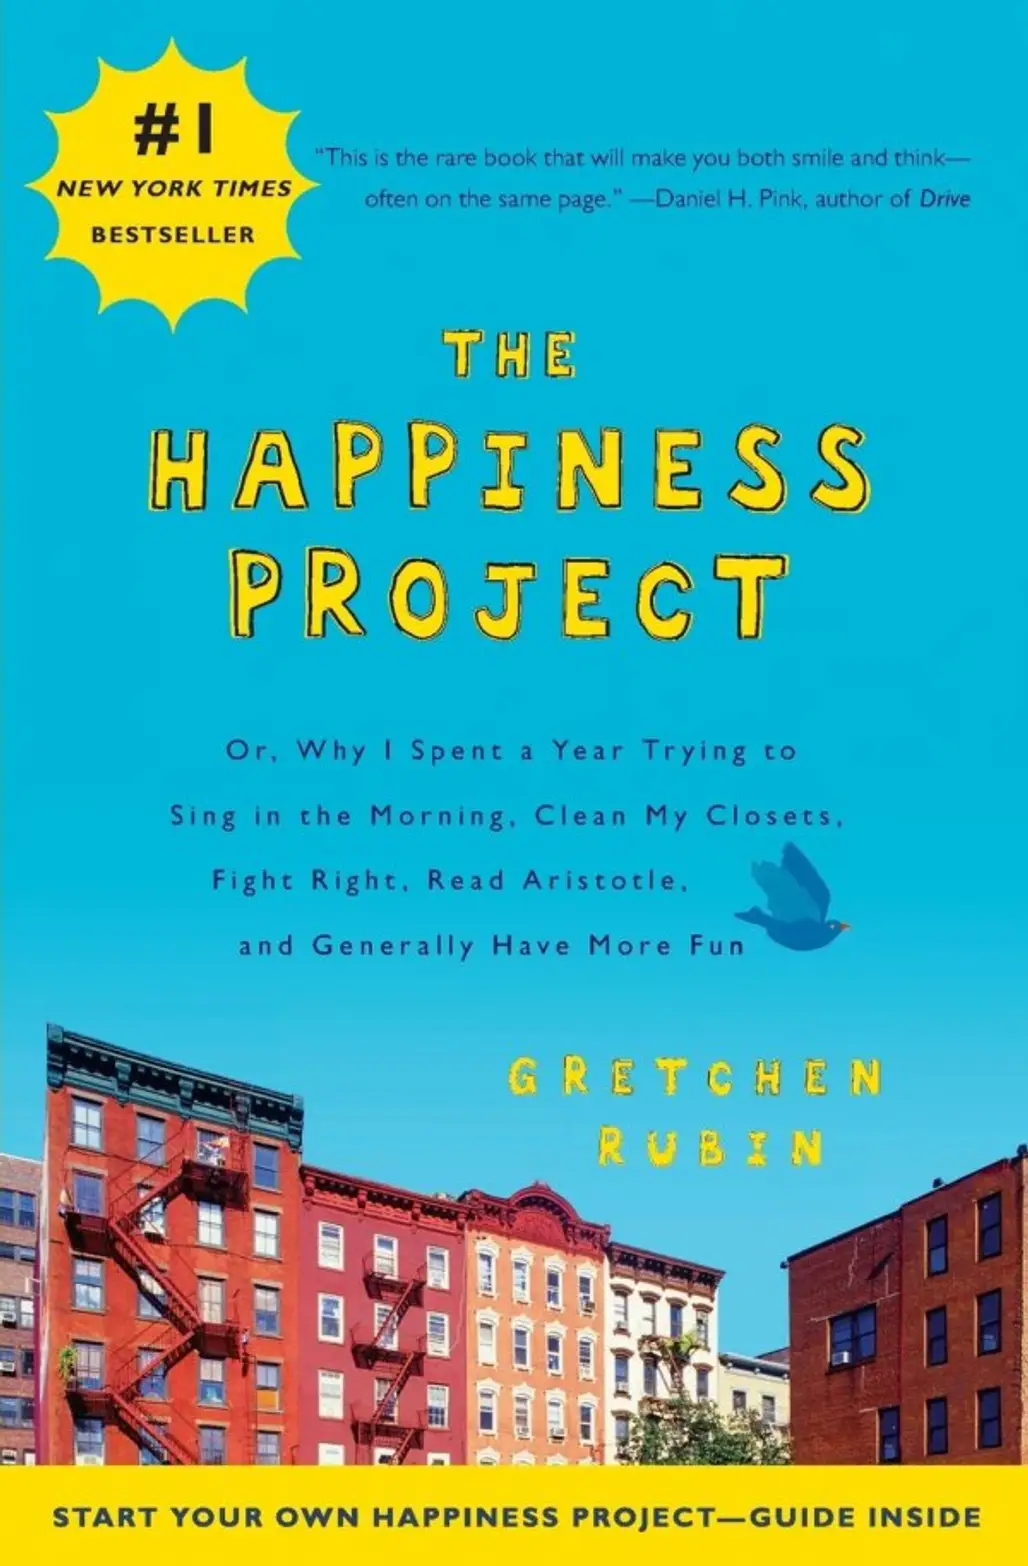 The Happiness Project One-Sentence Journal: a Five-Year Record by Gretchen Rubin